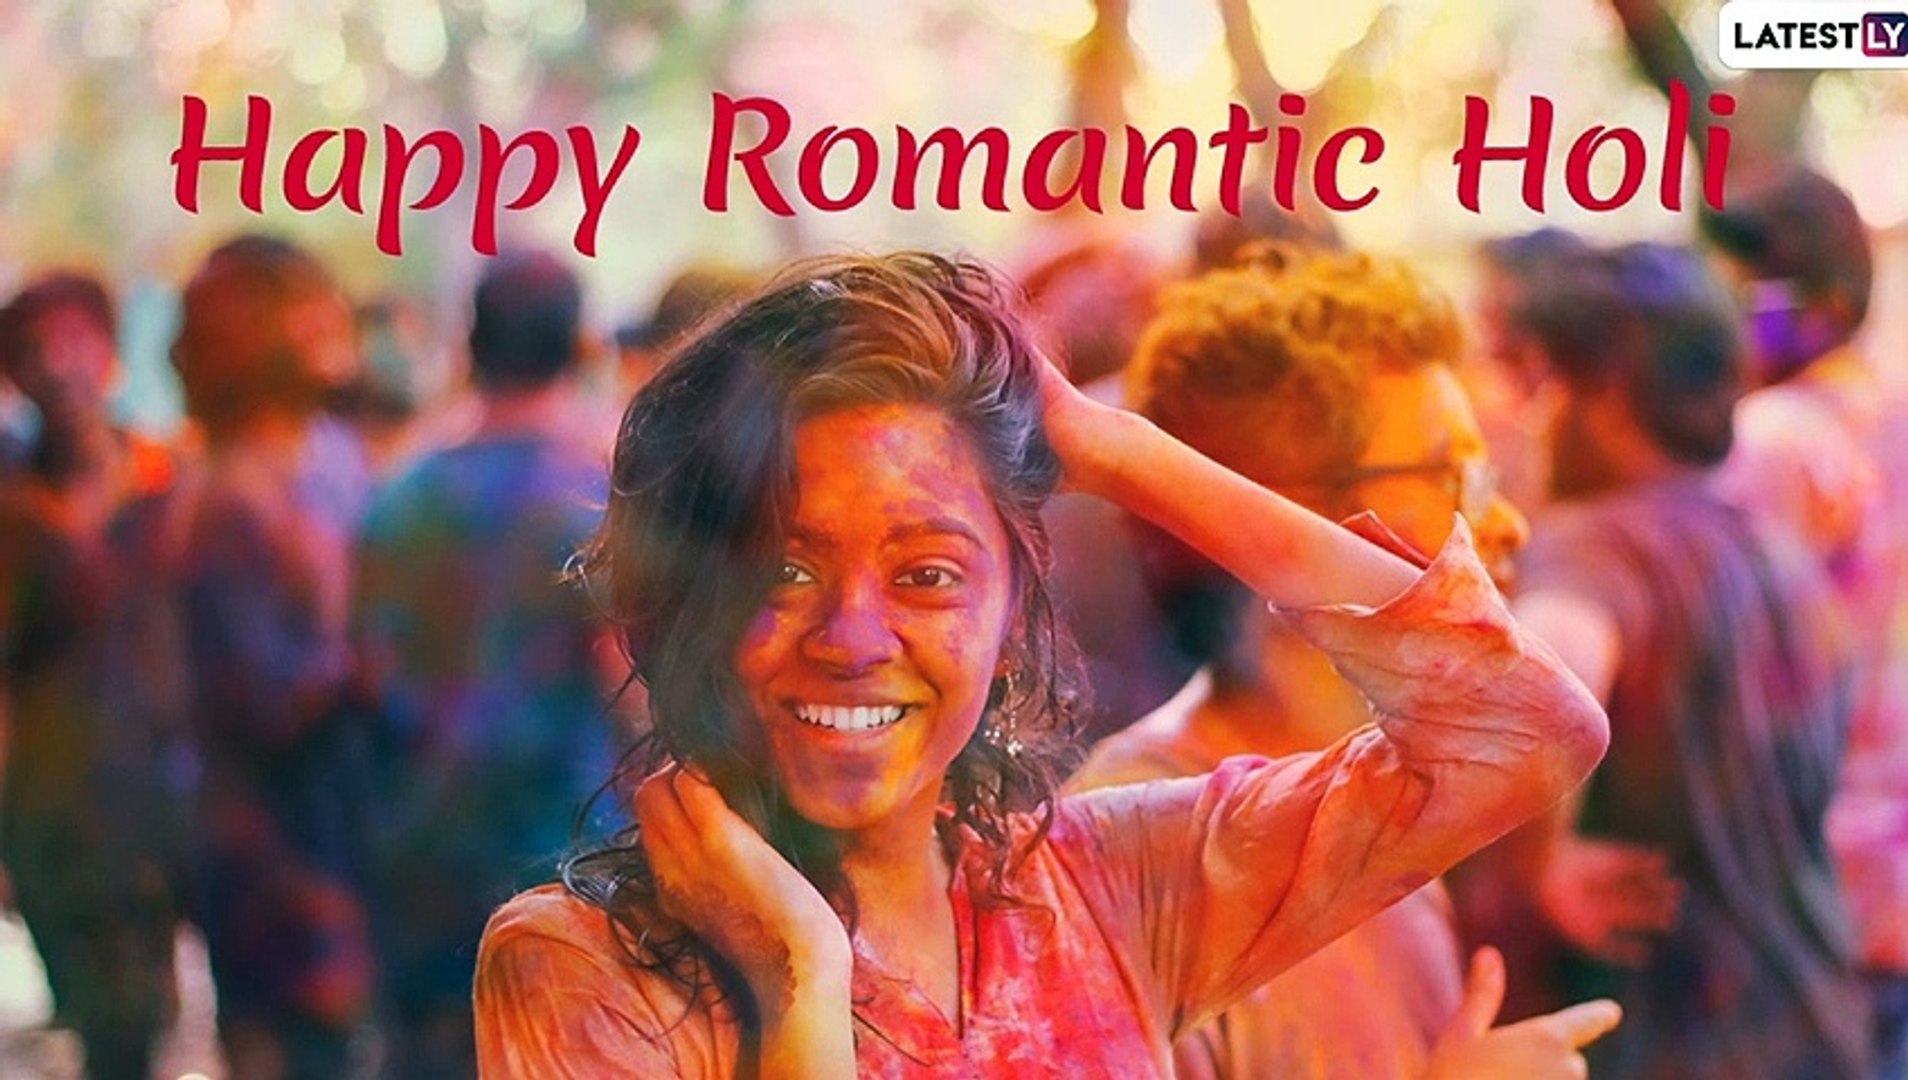 Holi 2020 Romantic Wishes For Husband & Wife: Greetings & HD Images For  Couples In Love - video Dailymotion